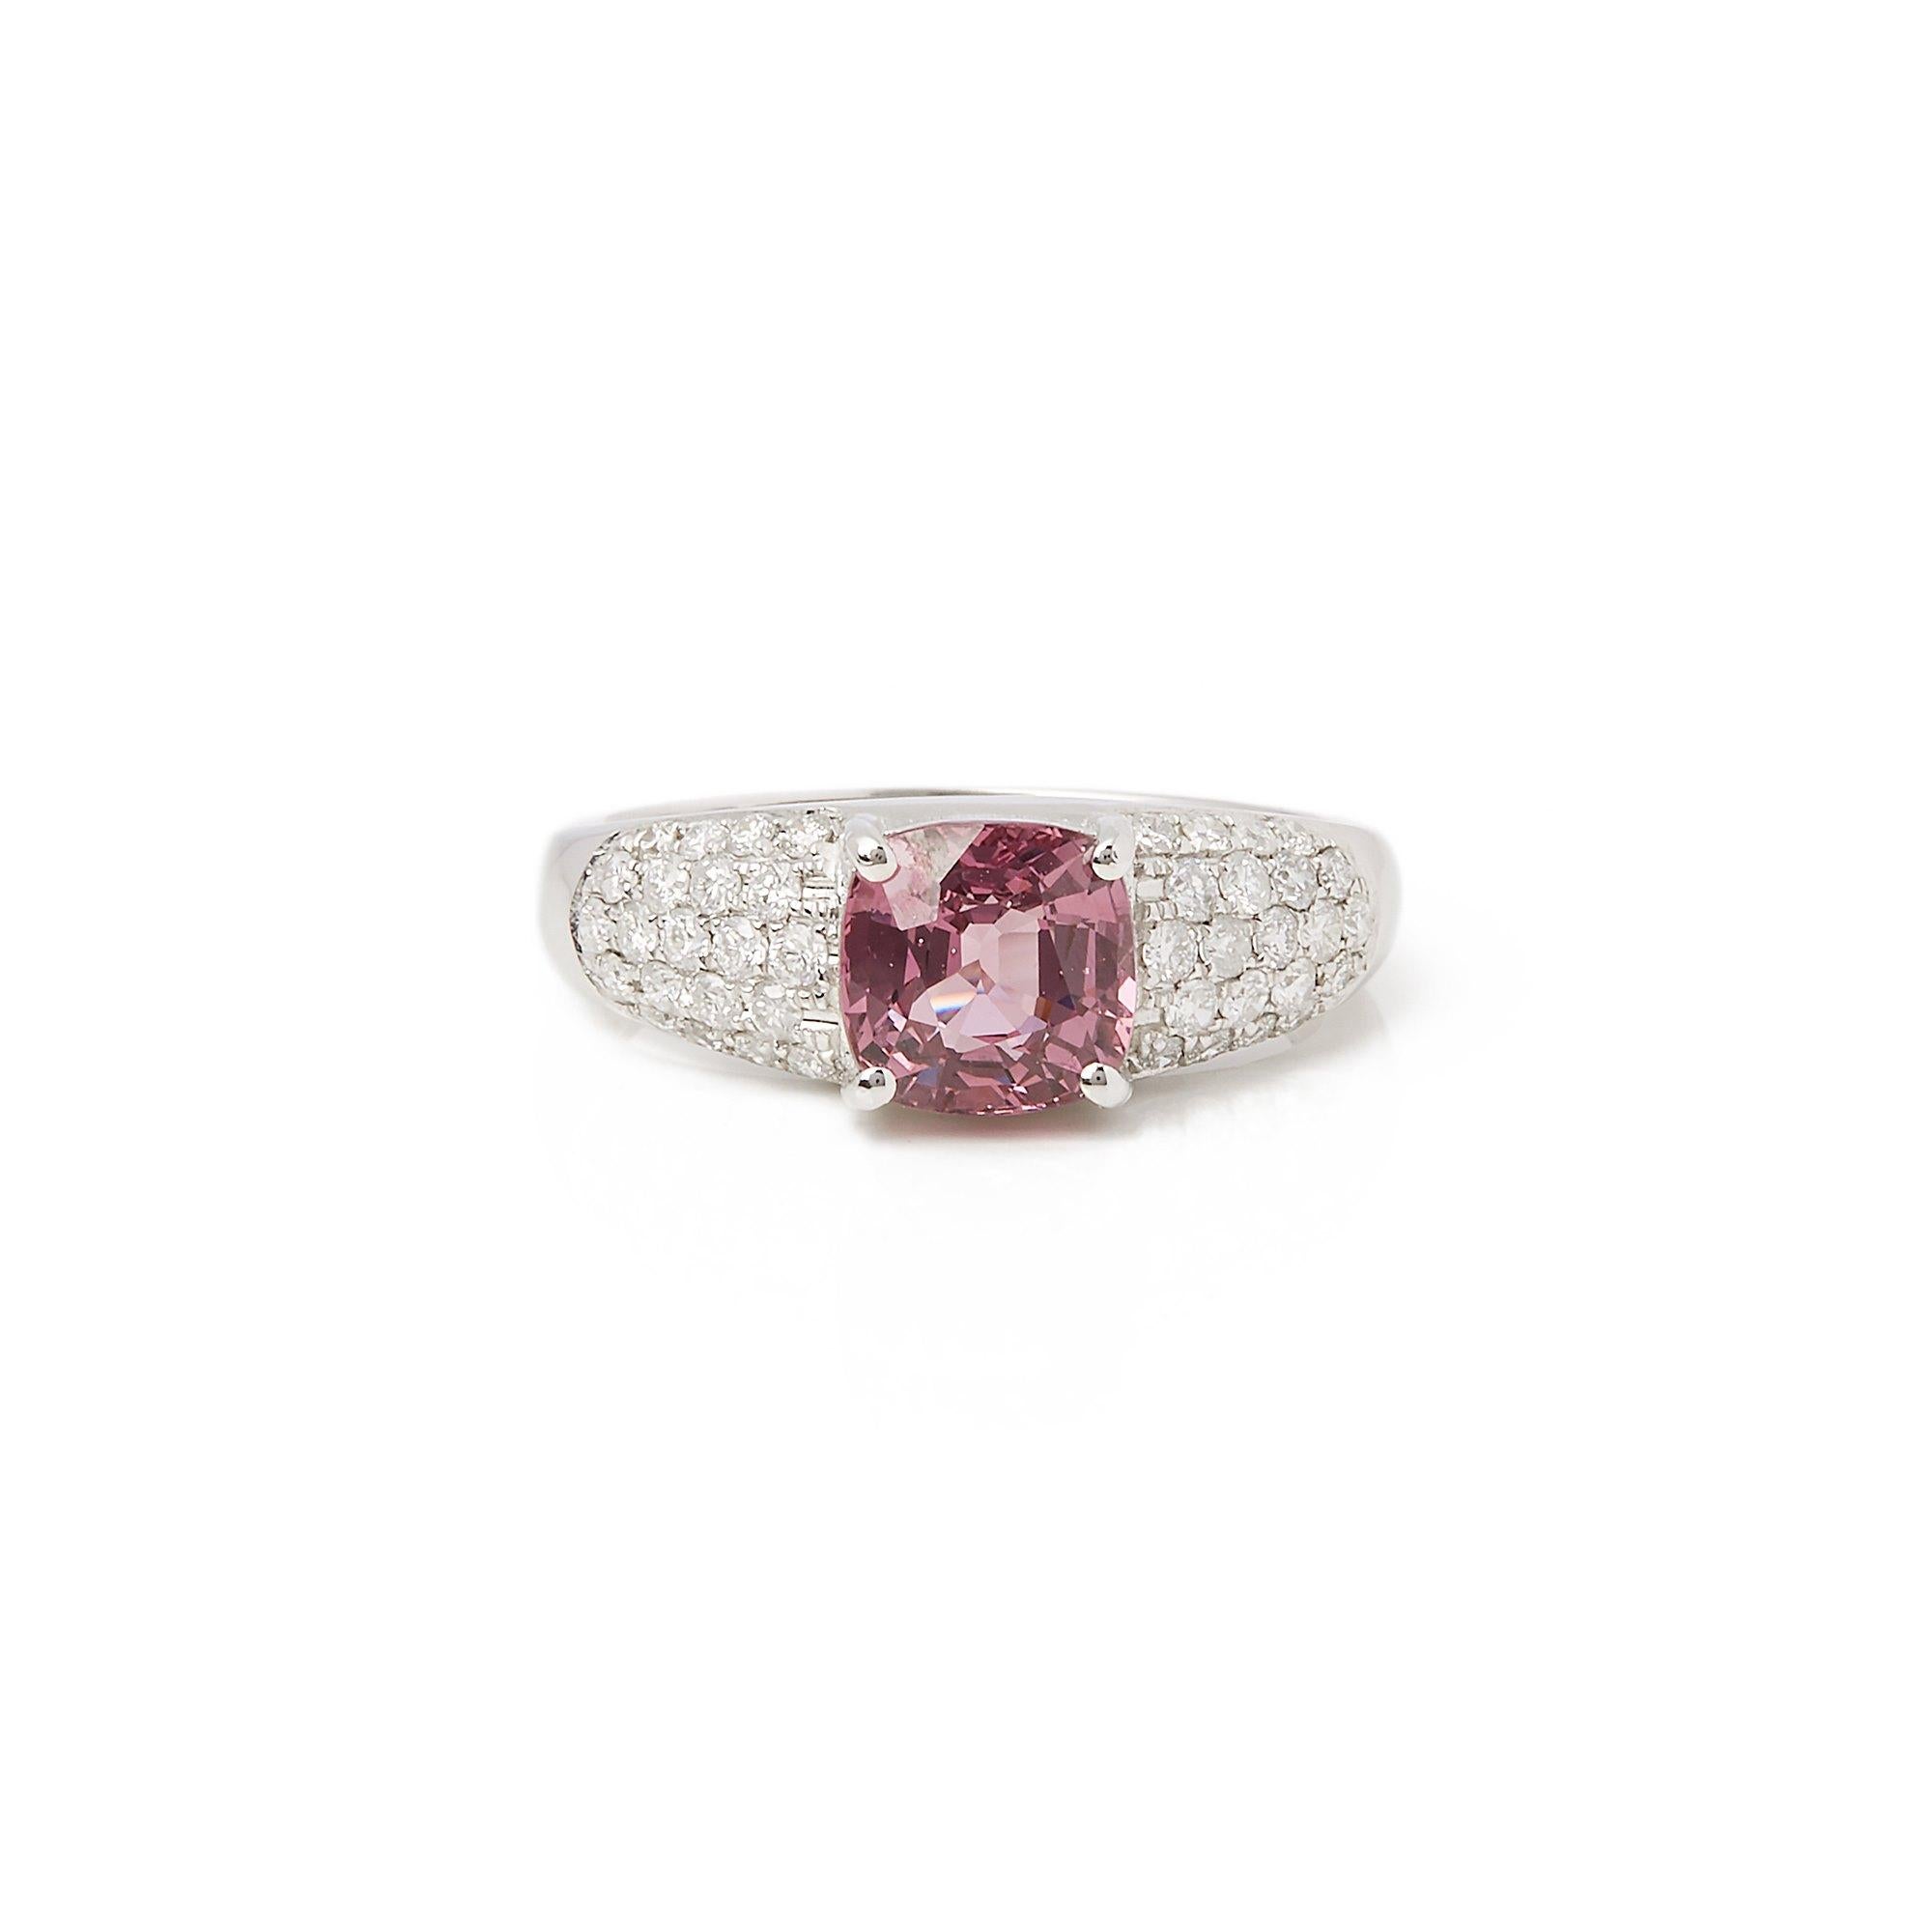 This ring designed by David Jerome is from his private collection and features one cushion cut untreated spinel sourced in Tanzania. Totalling 2.03cts set with round brilliant cut Diamonds totalling 0.51cts. Mounted in an 18k white gold setting.